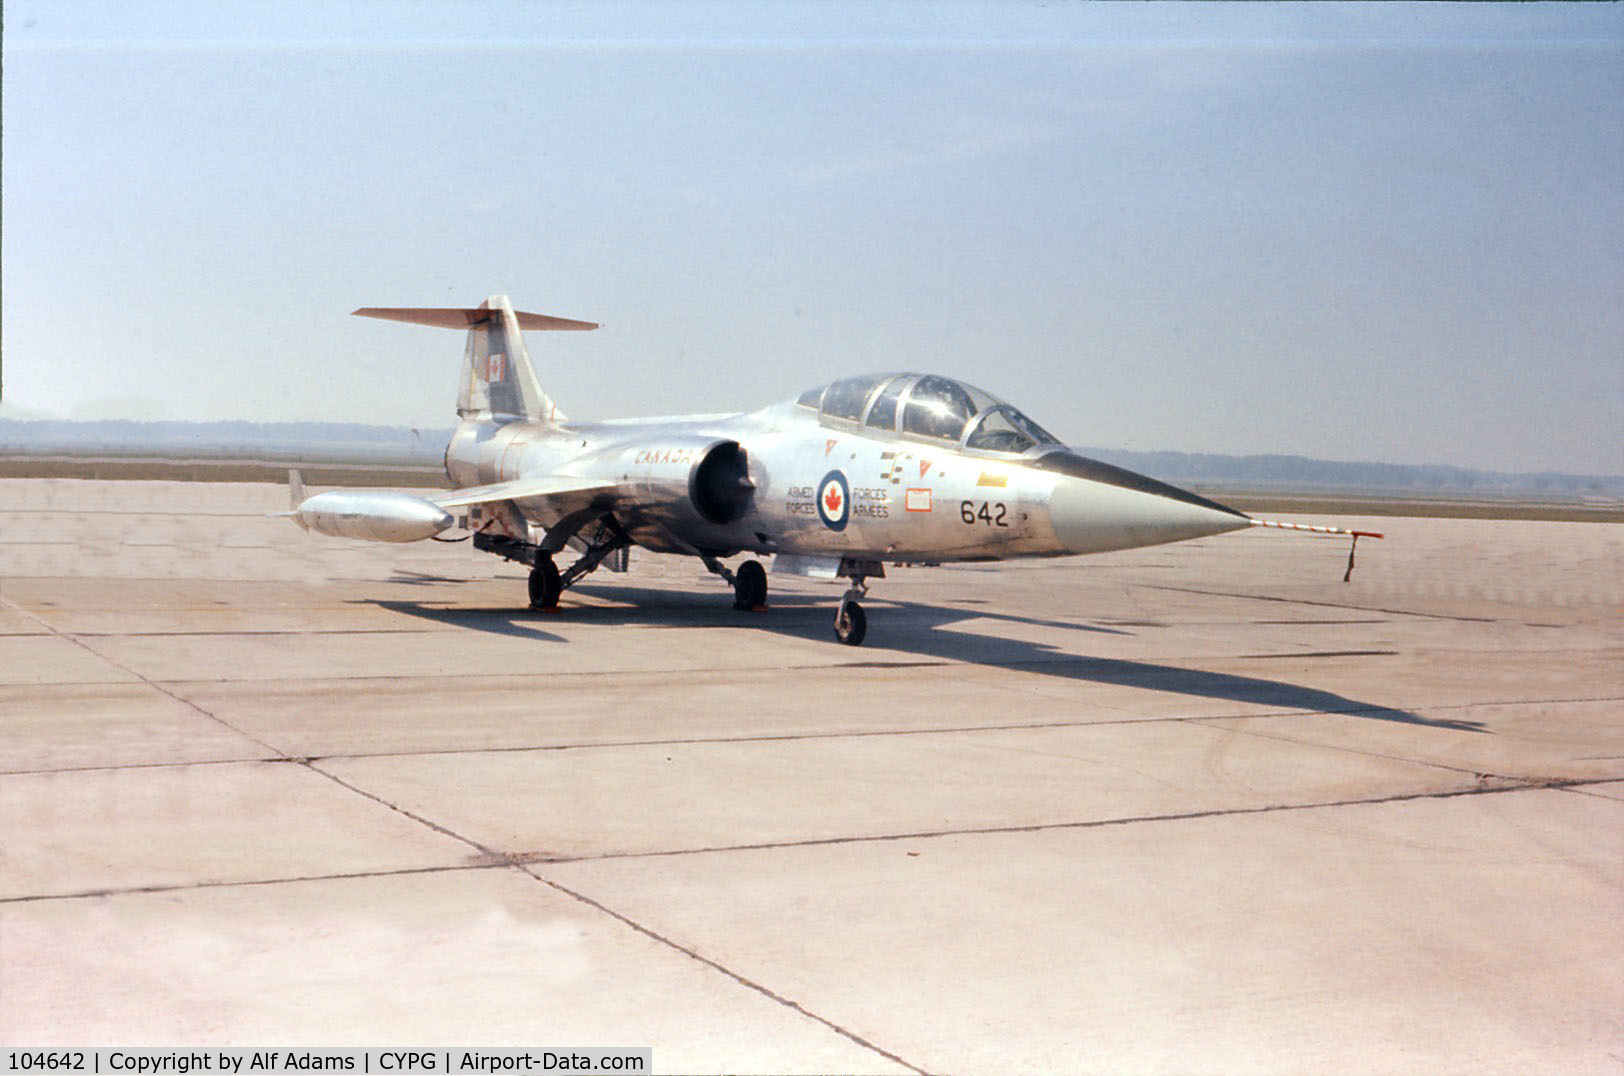 104642, Lockheed CF-104D Starfighter C/N 583A-5312, Shown parked at Canadian Forces Base Portage la Prairie, Manitoba, Canada, for the annual airshow in 1976.